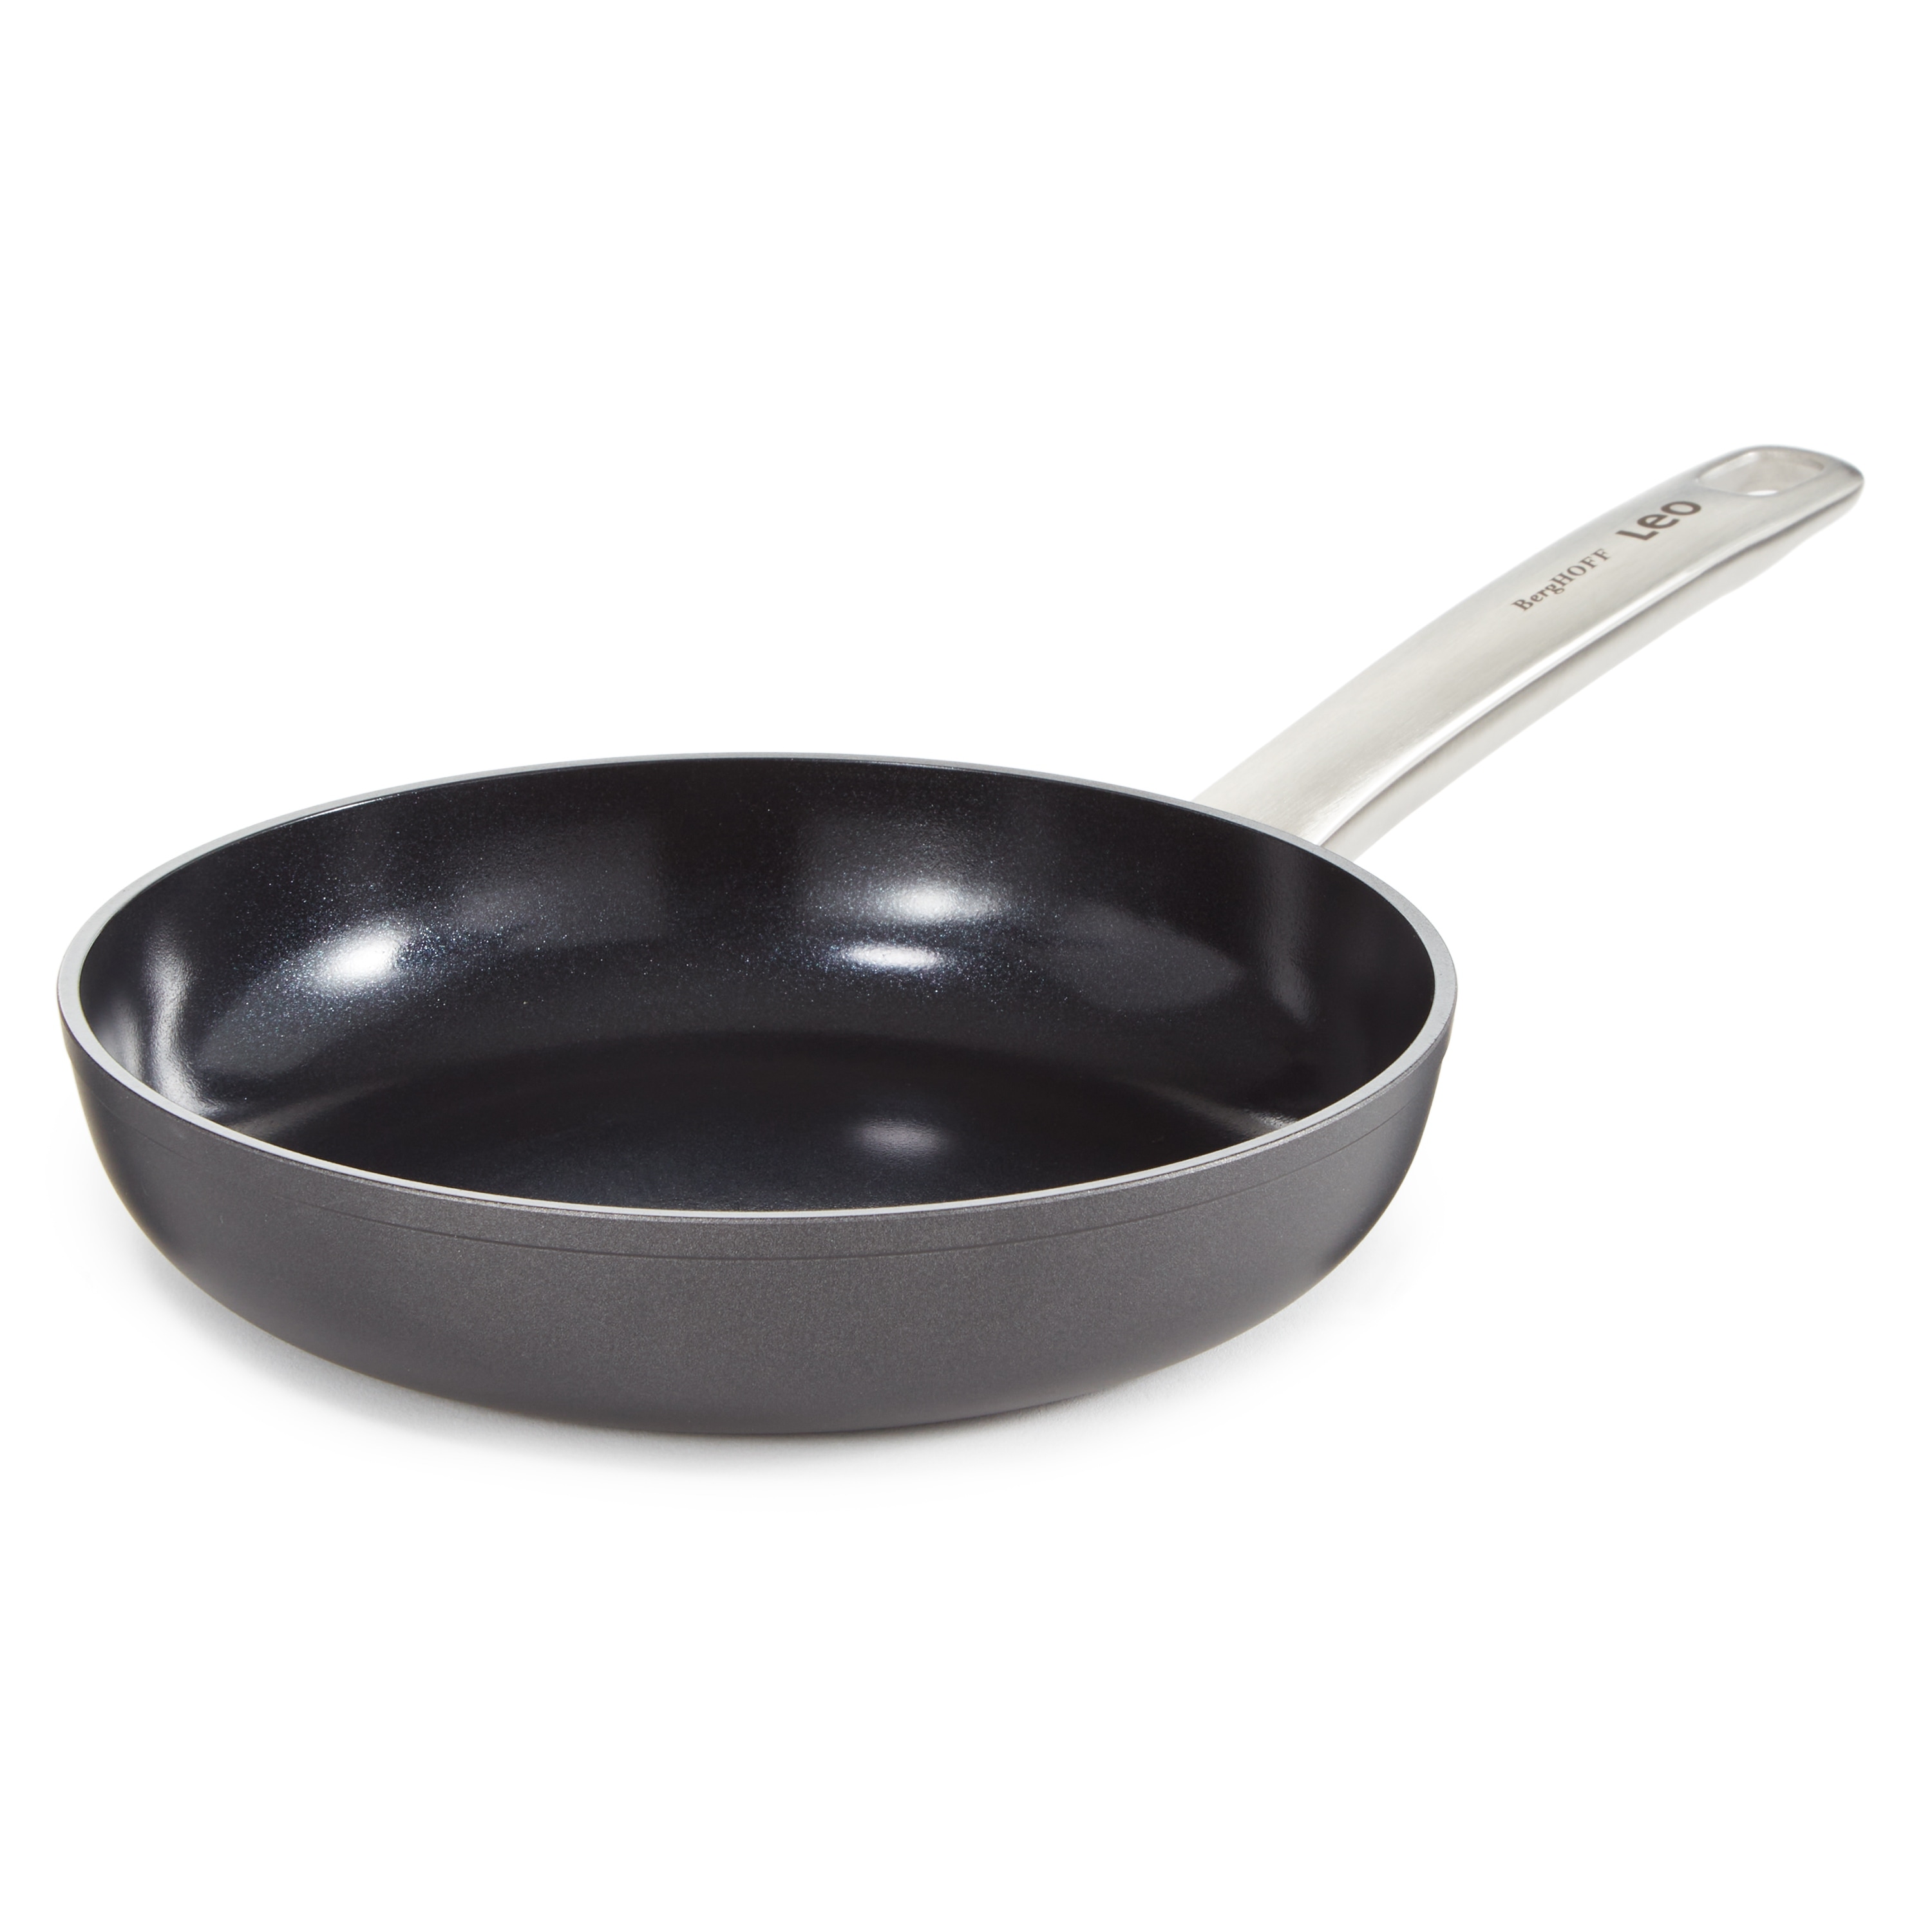 https://ak1.ostkcdn.com/images/products/is/images/direct/8e4576b9cbf79bdf9cb175896b6e0515aaa41f98/BergHOFF-Graphite-Non-stick-Ceramic-Frying-Pan-8%22%2C-Sustainable-Recycled-Material.jpg